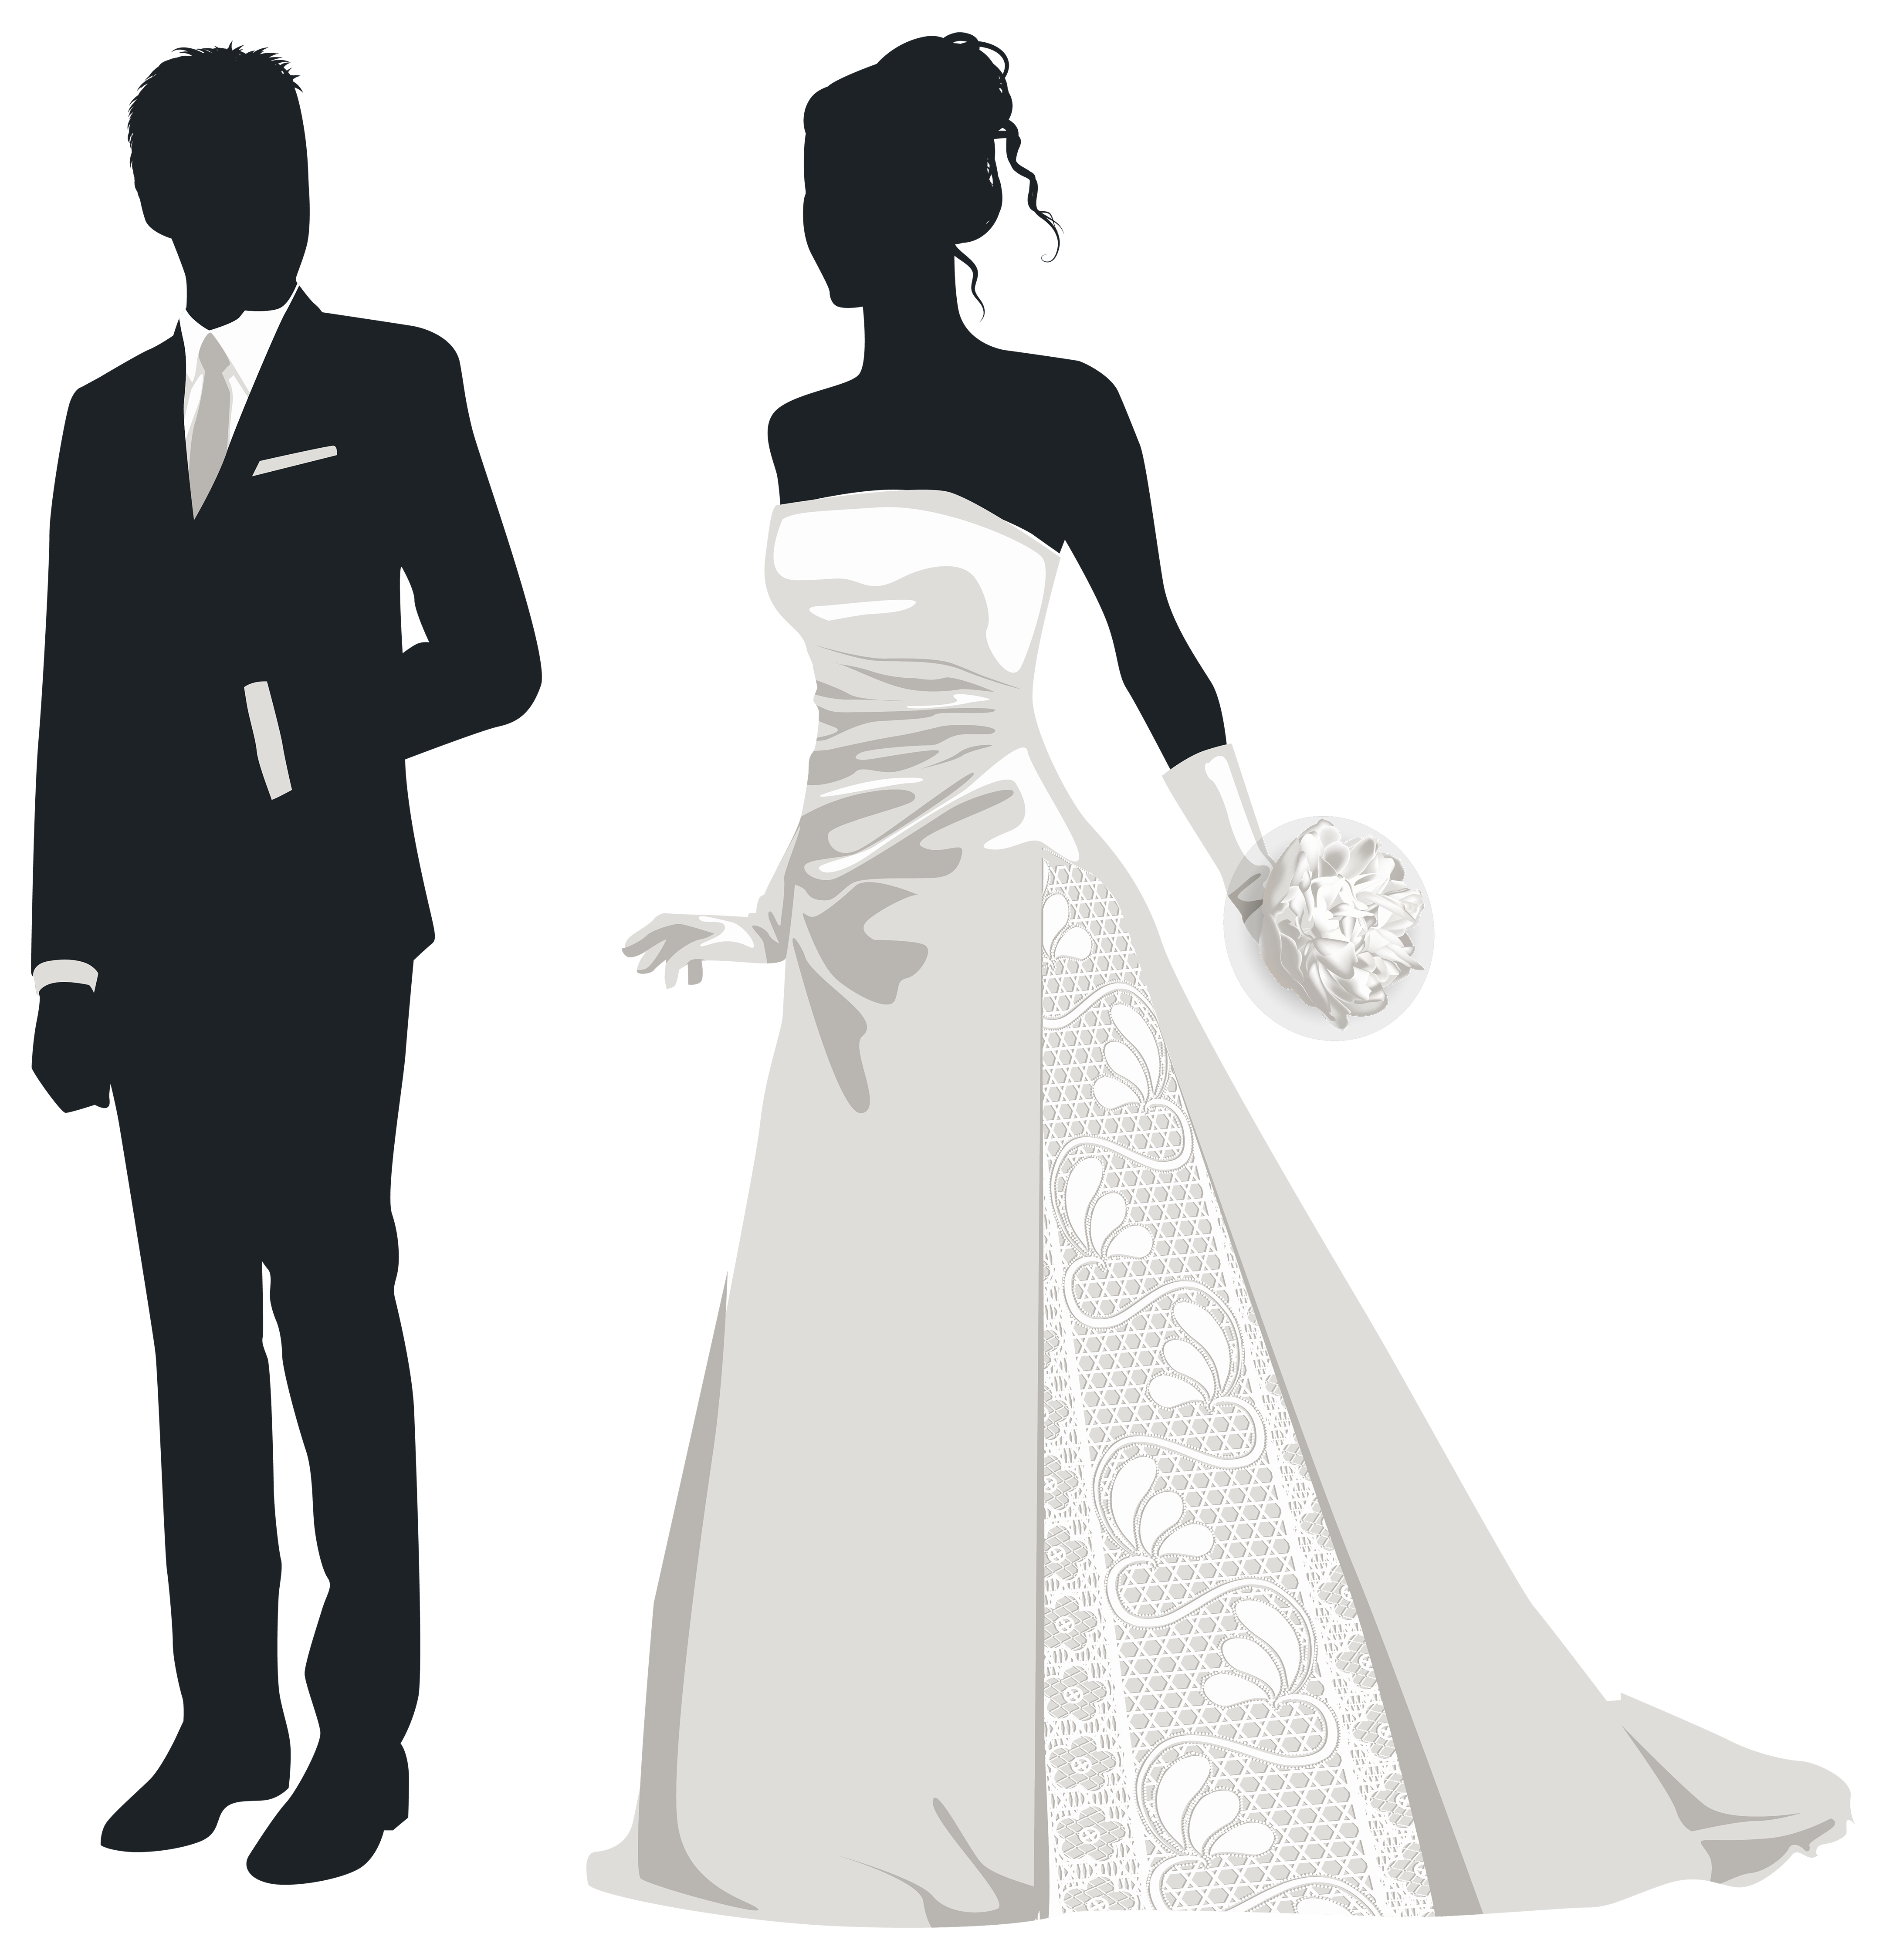 bride and groom kissing clipart